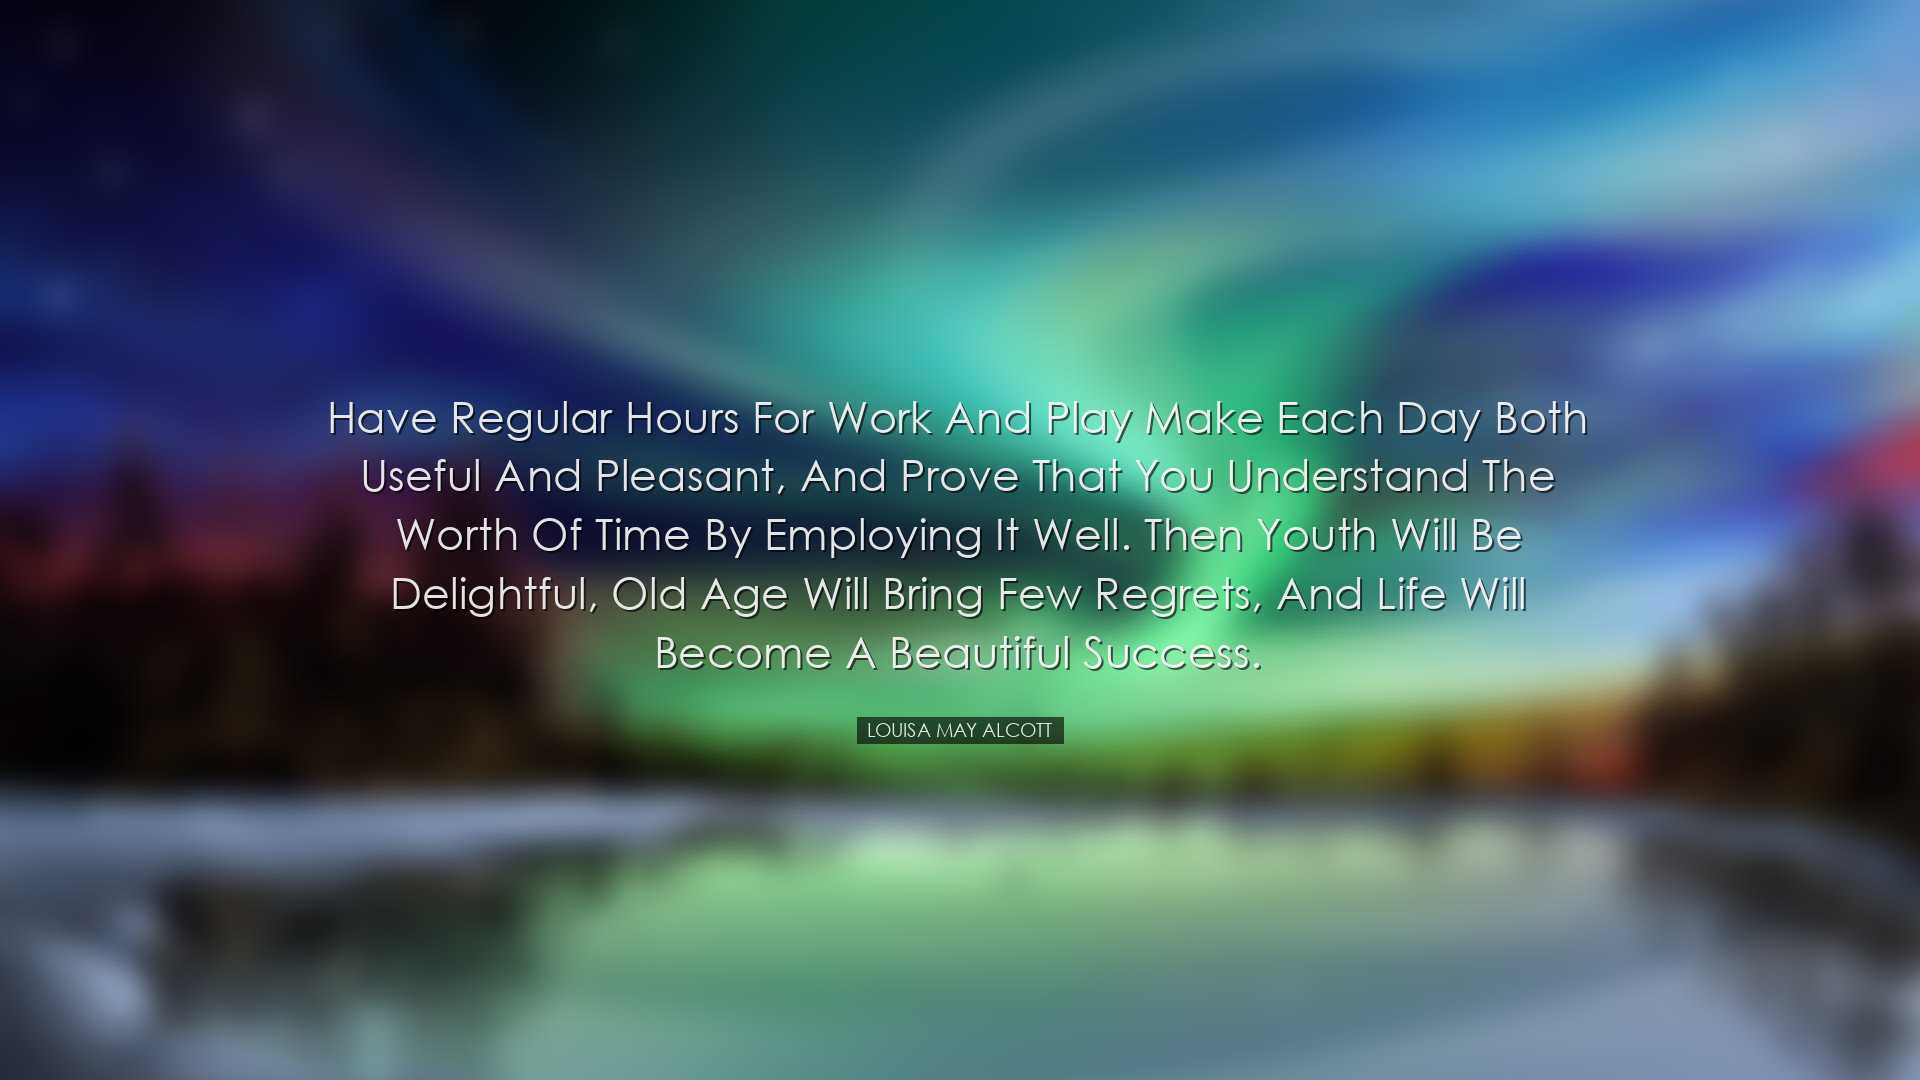 Have regular hours for work and play make each day both useful and